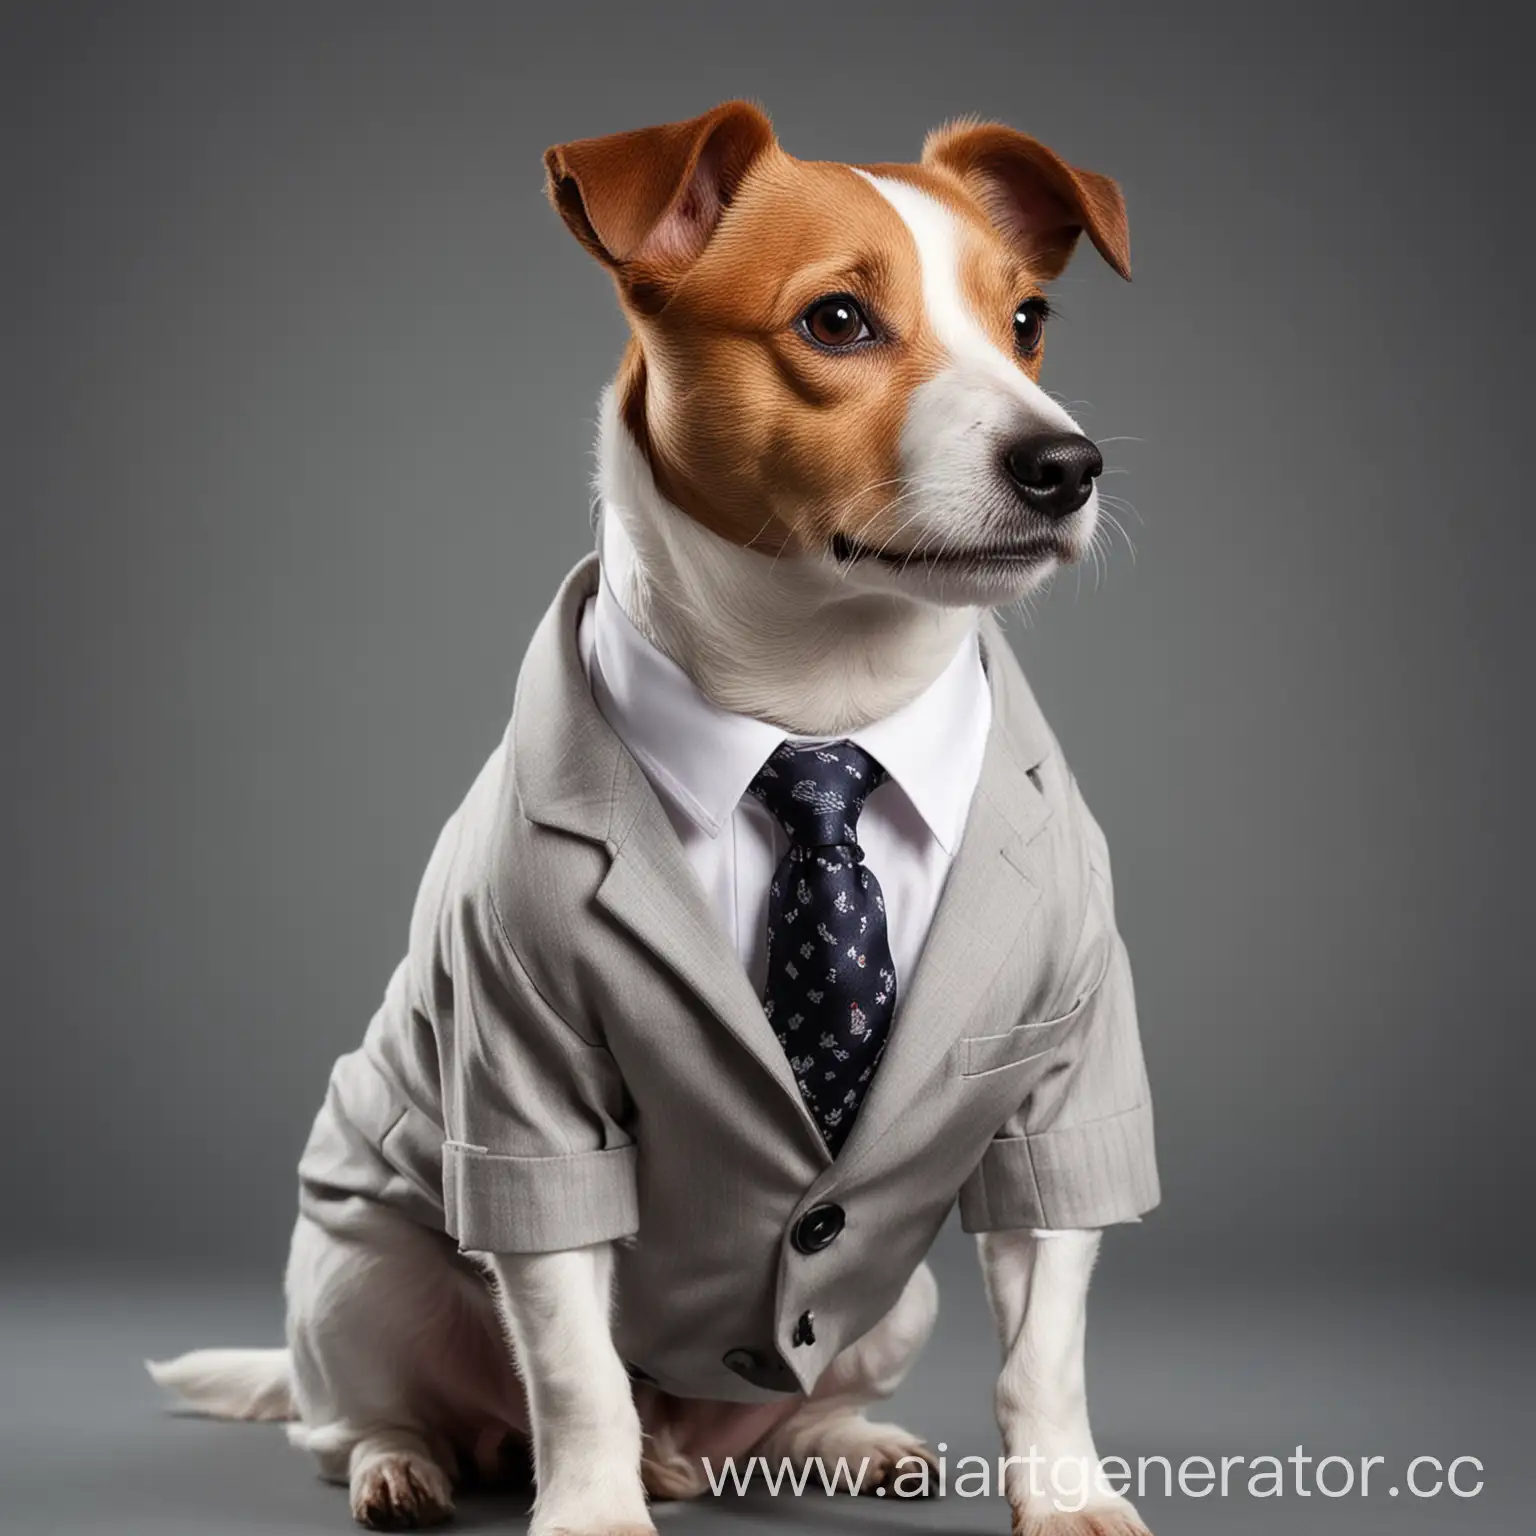 A Jack Russell Terrier dog in a business suit